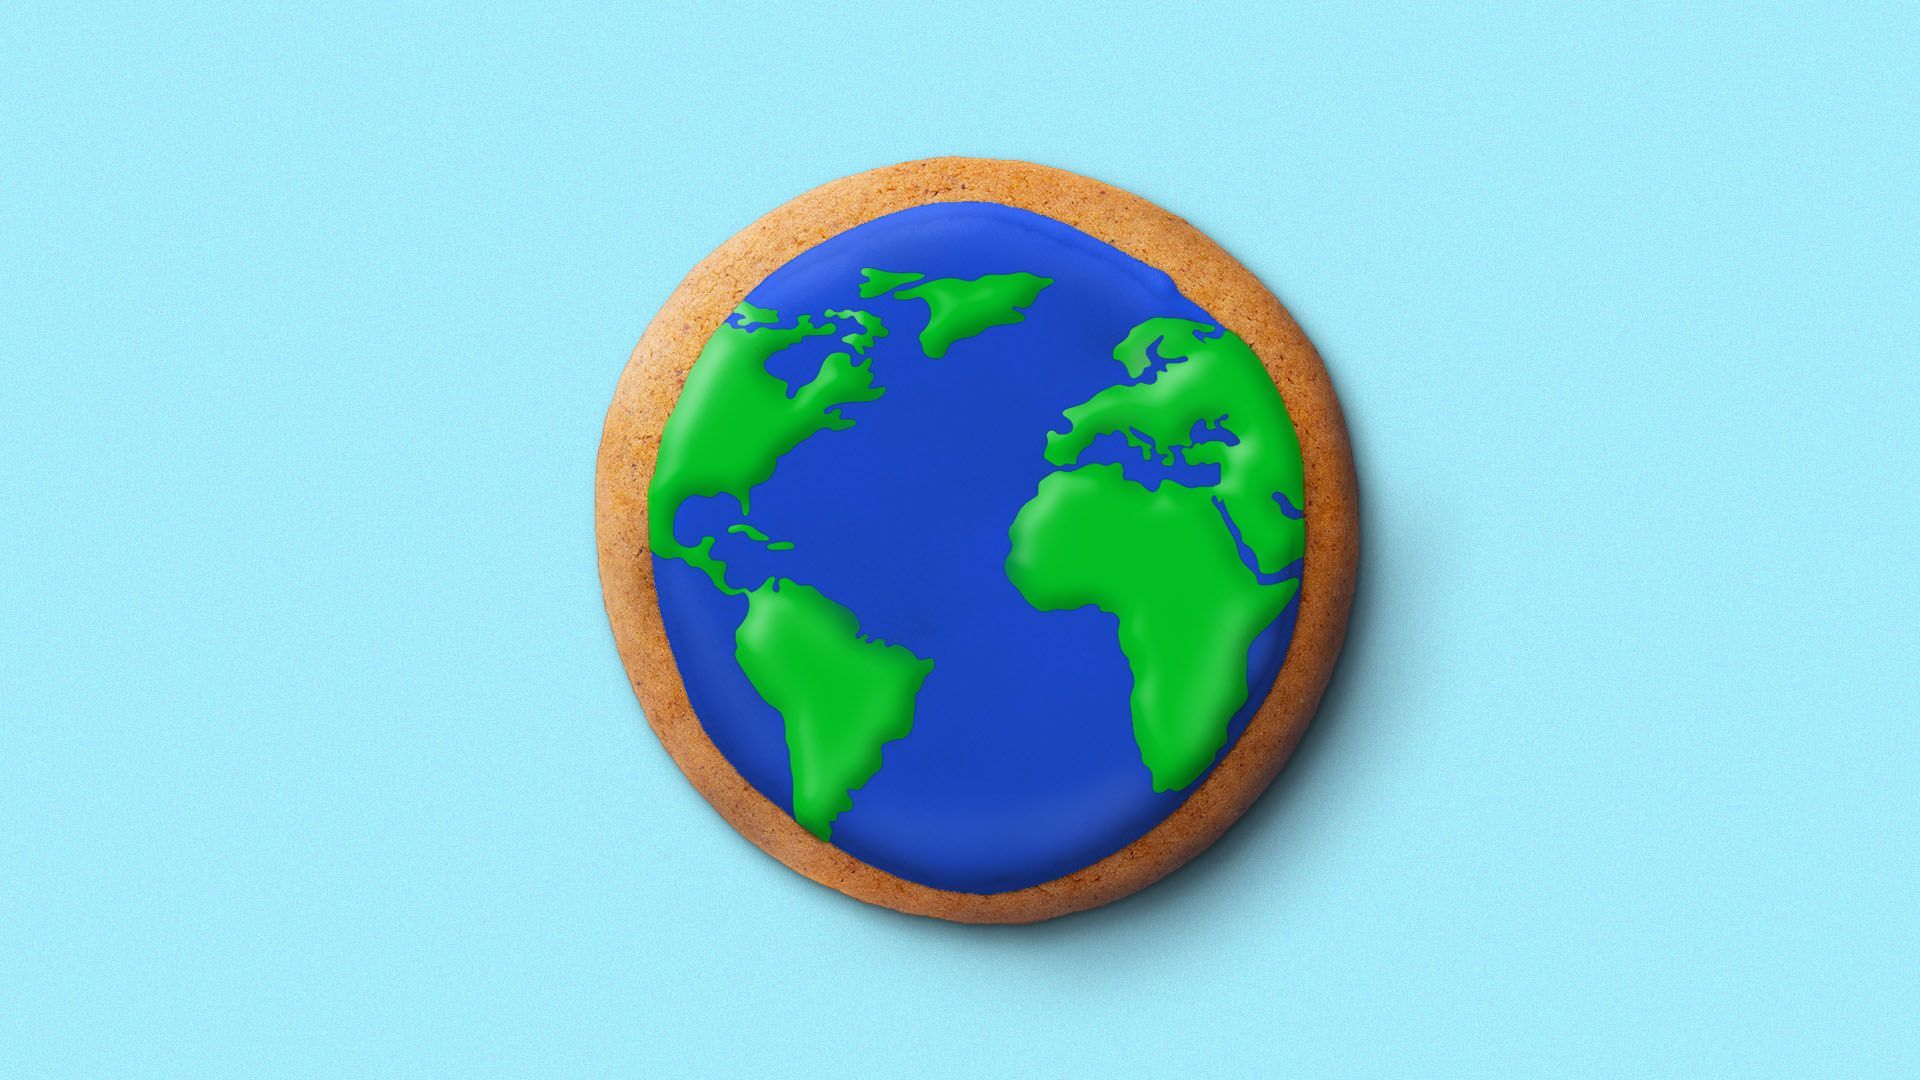 illustration of a sugar cookie that has been frosted to look like the earth